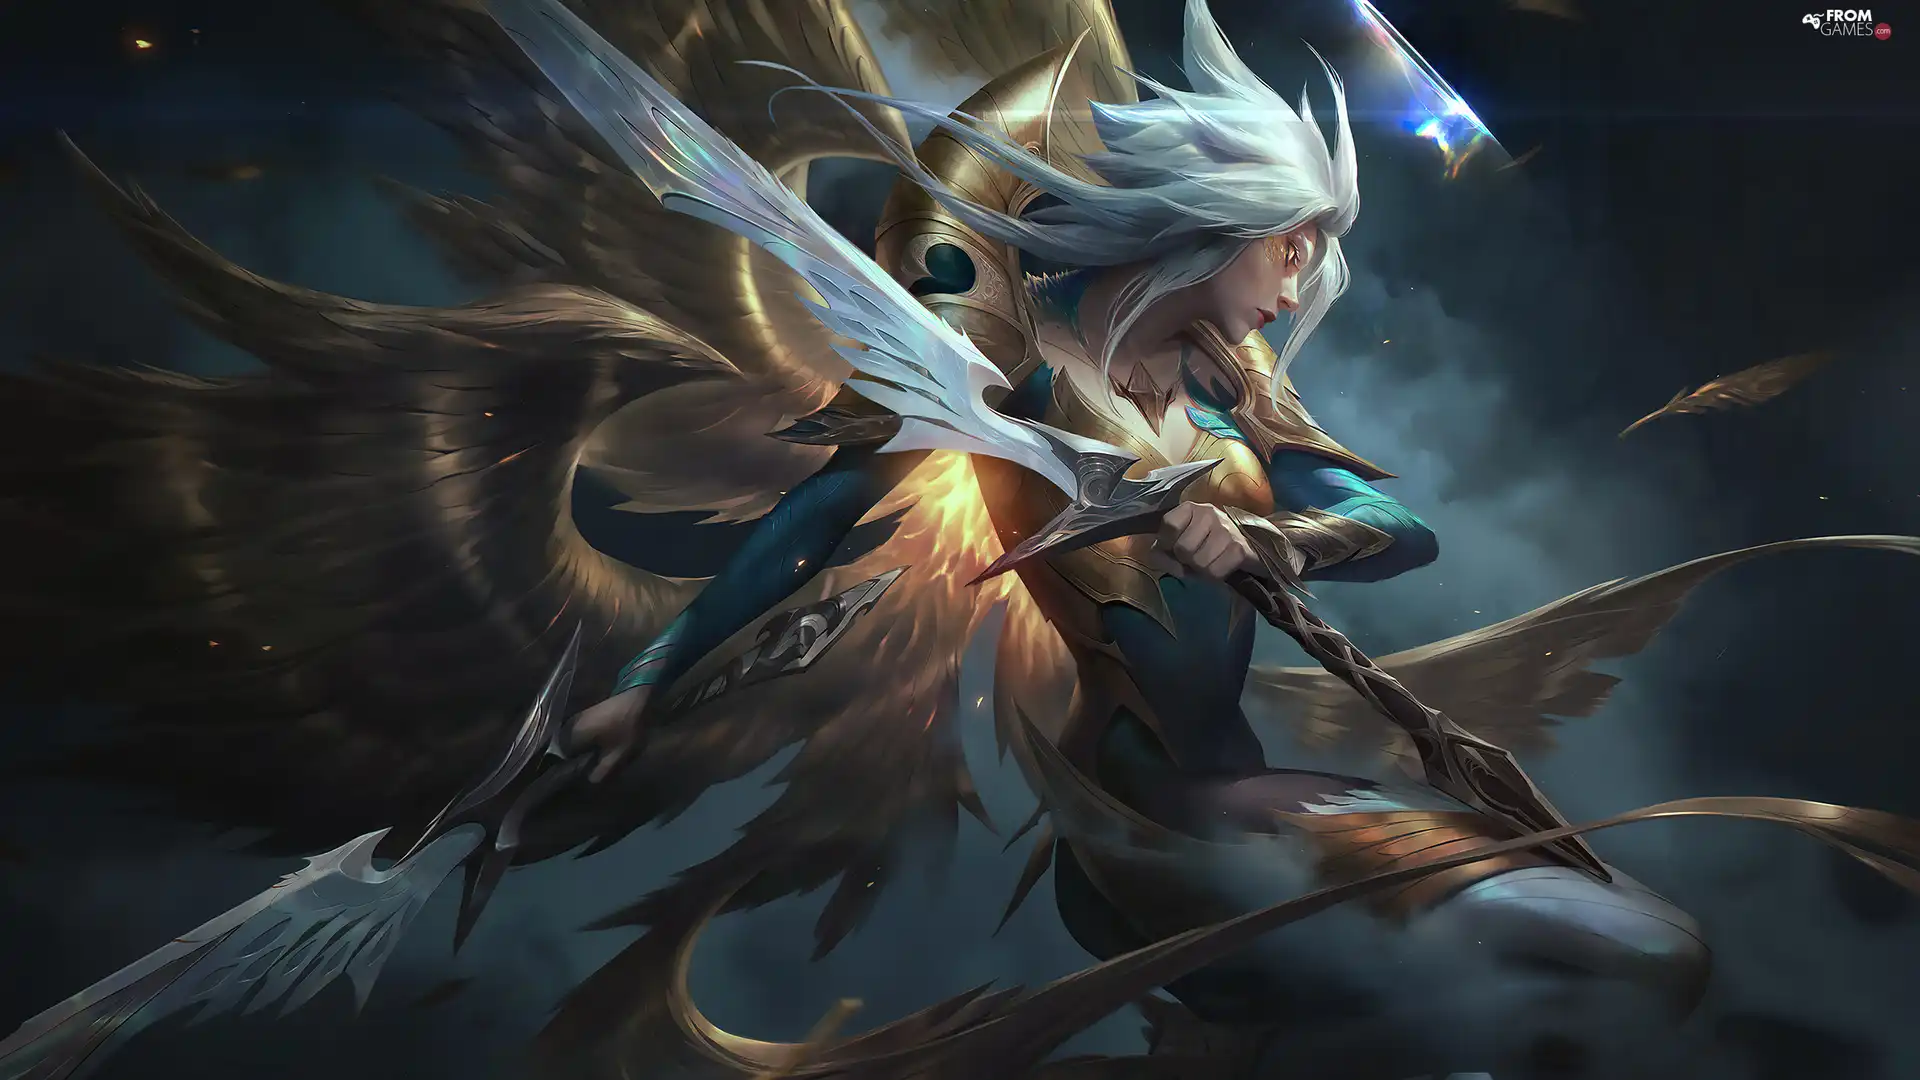 Women, form, wings, angel, Weapons, League Of Legends, game, Kayle